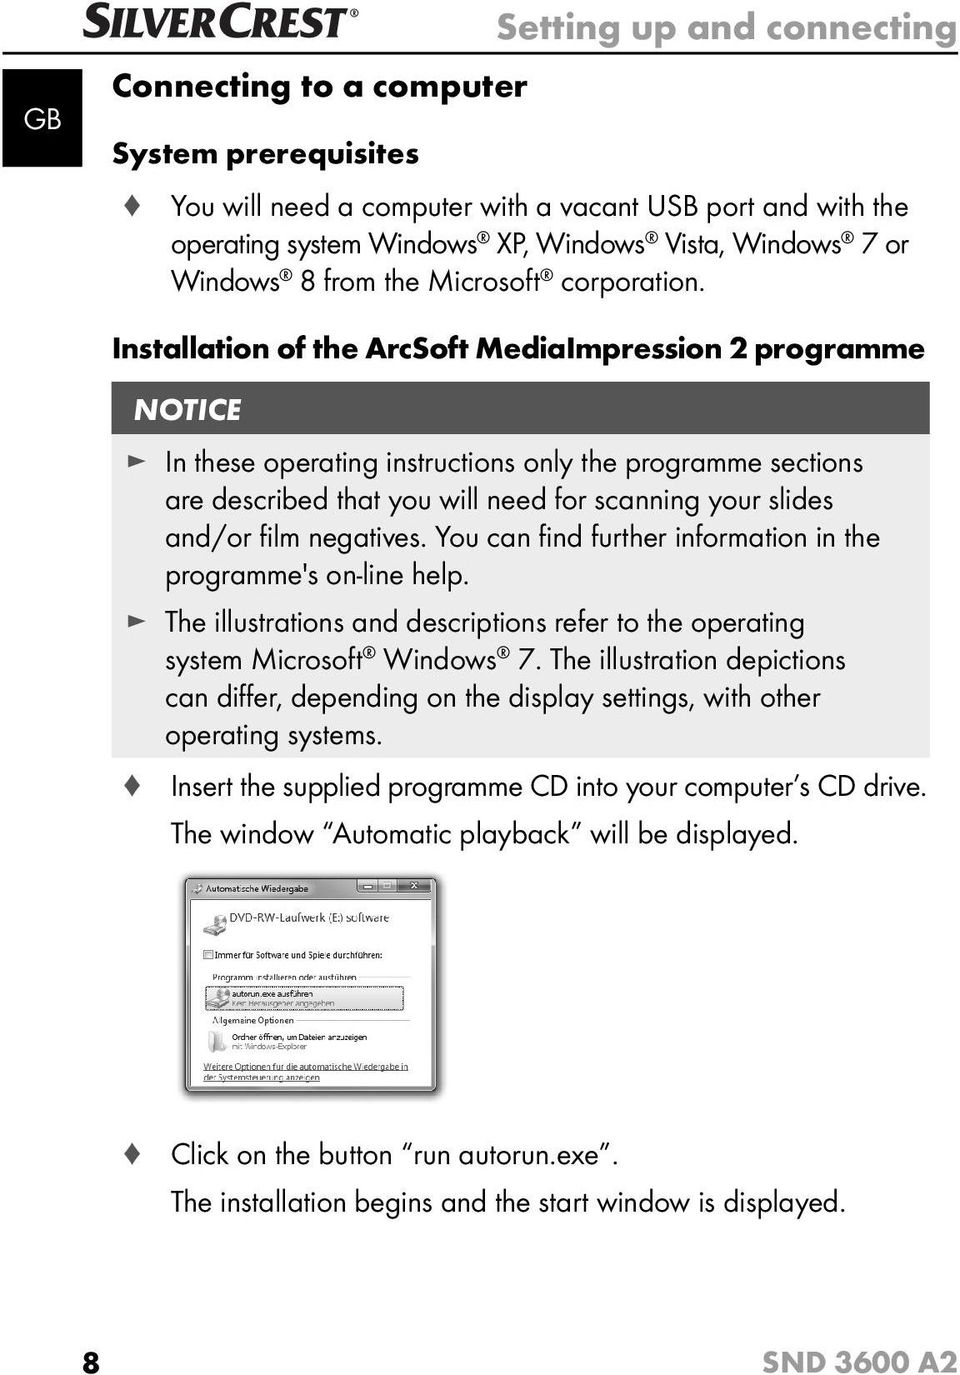 Installation of the ArcSoft MediaImpression 2 programme NOTICE In these operating instructions only the programme sections are described that you will need for scanning your slides and/or fi lm